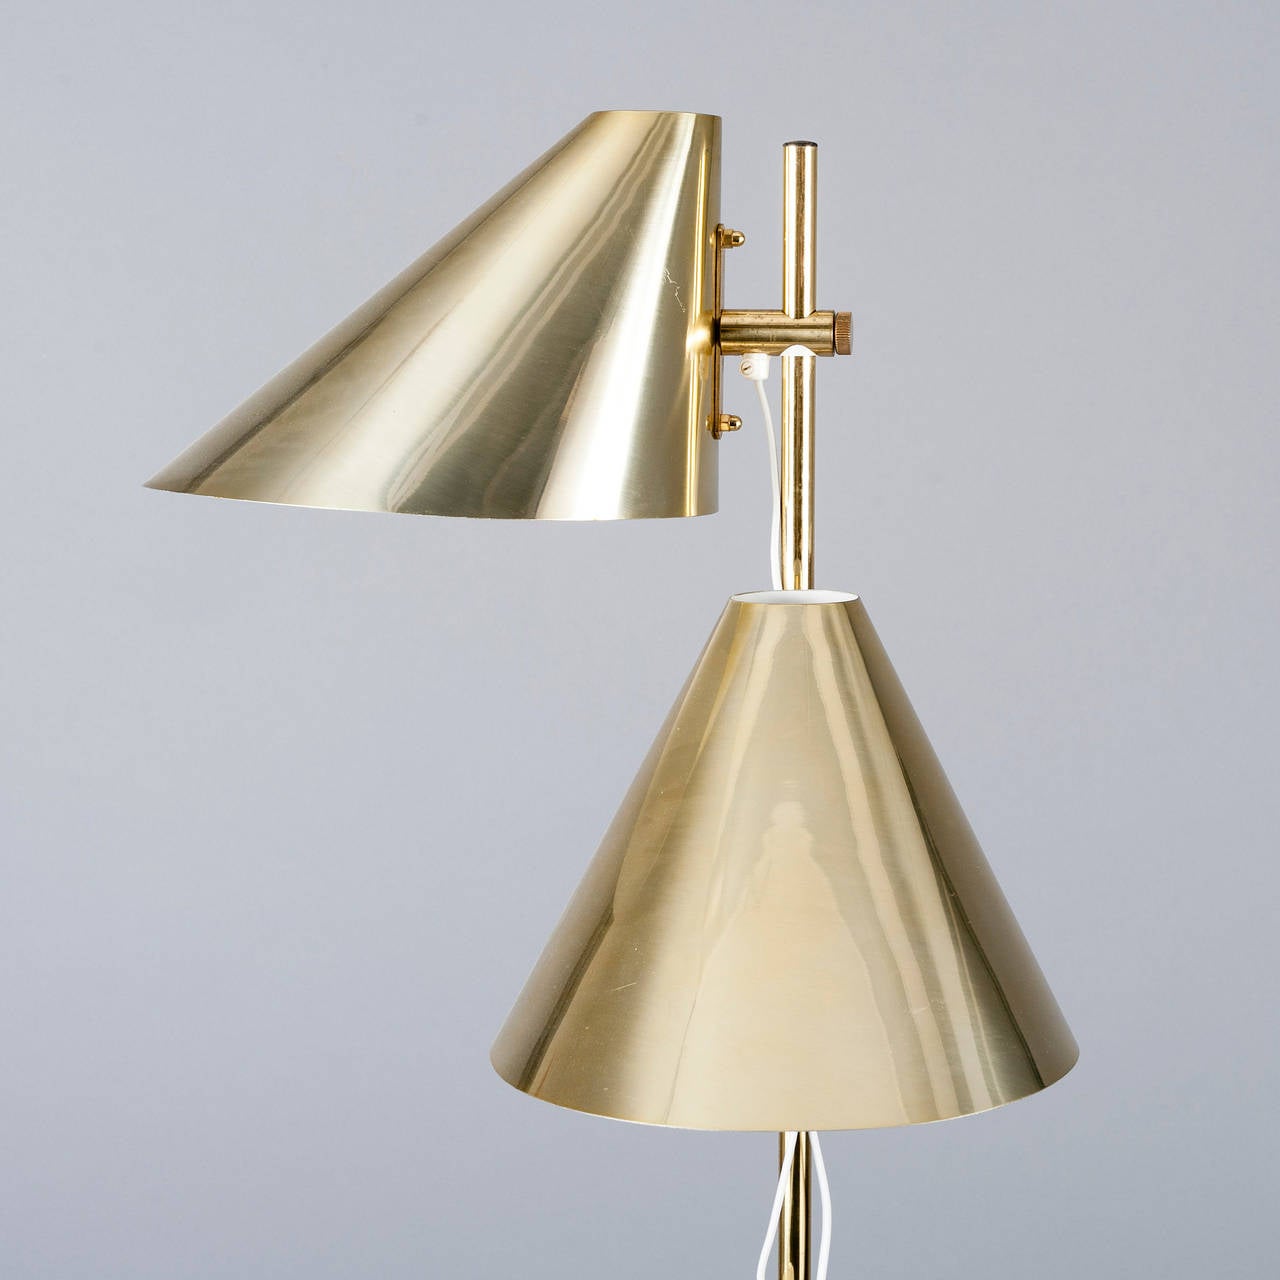 Floor lamp designed by Hans-Agne Jakobsson, Sweden, circa 1970s.
Two adjustable height shades, polished brass finish. Dimensions:
H- 60